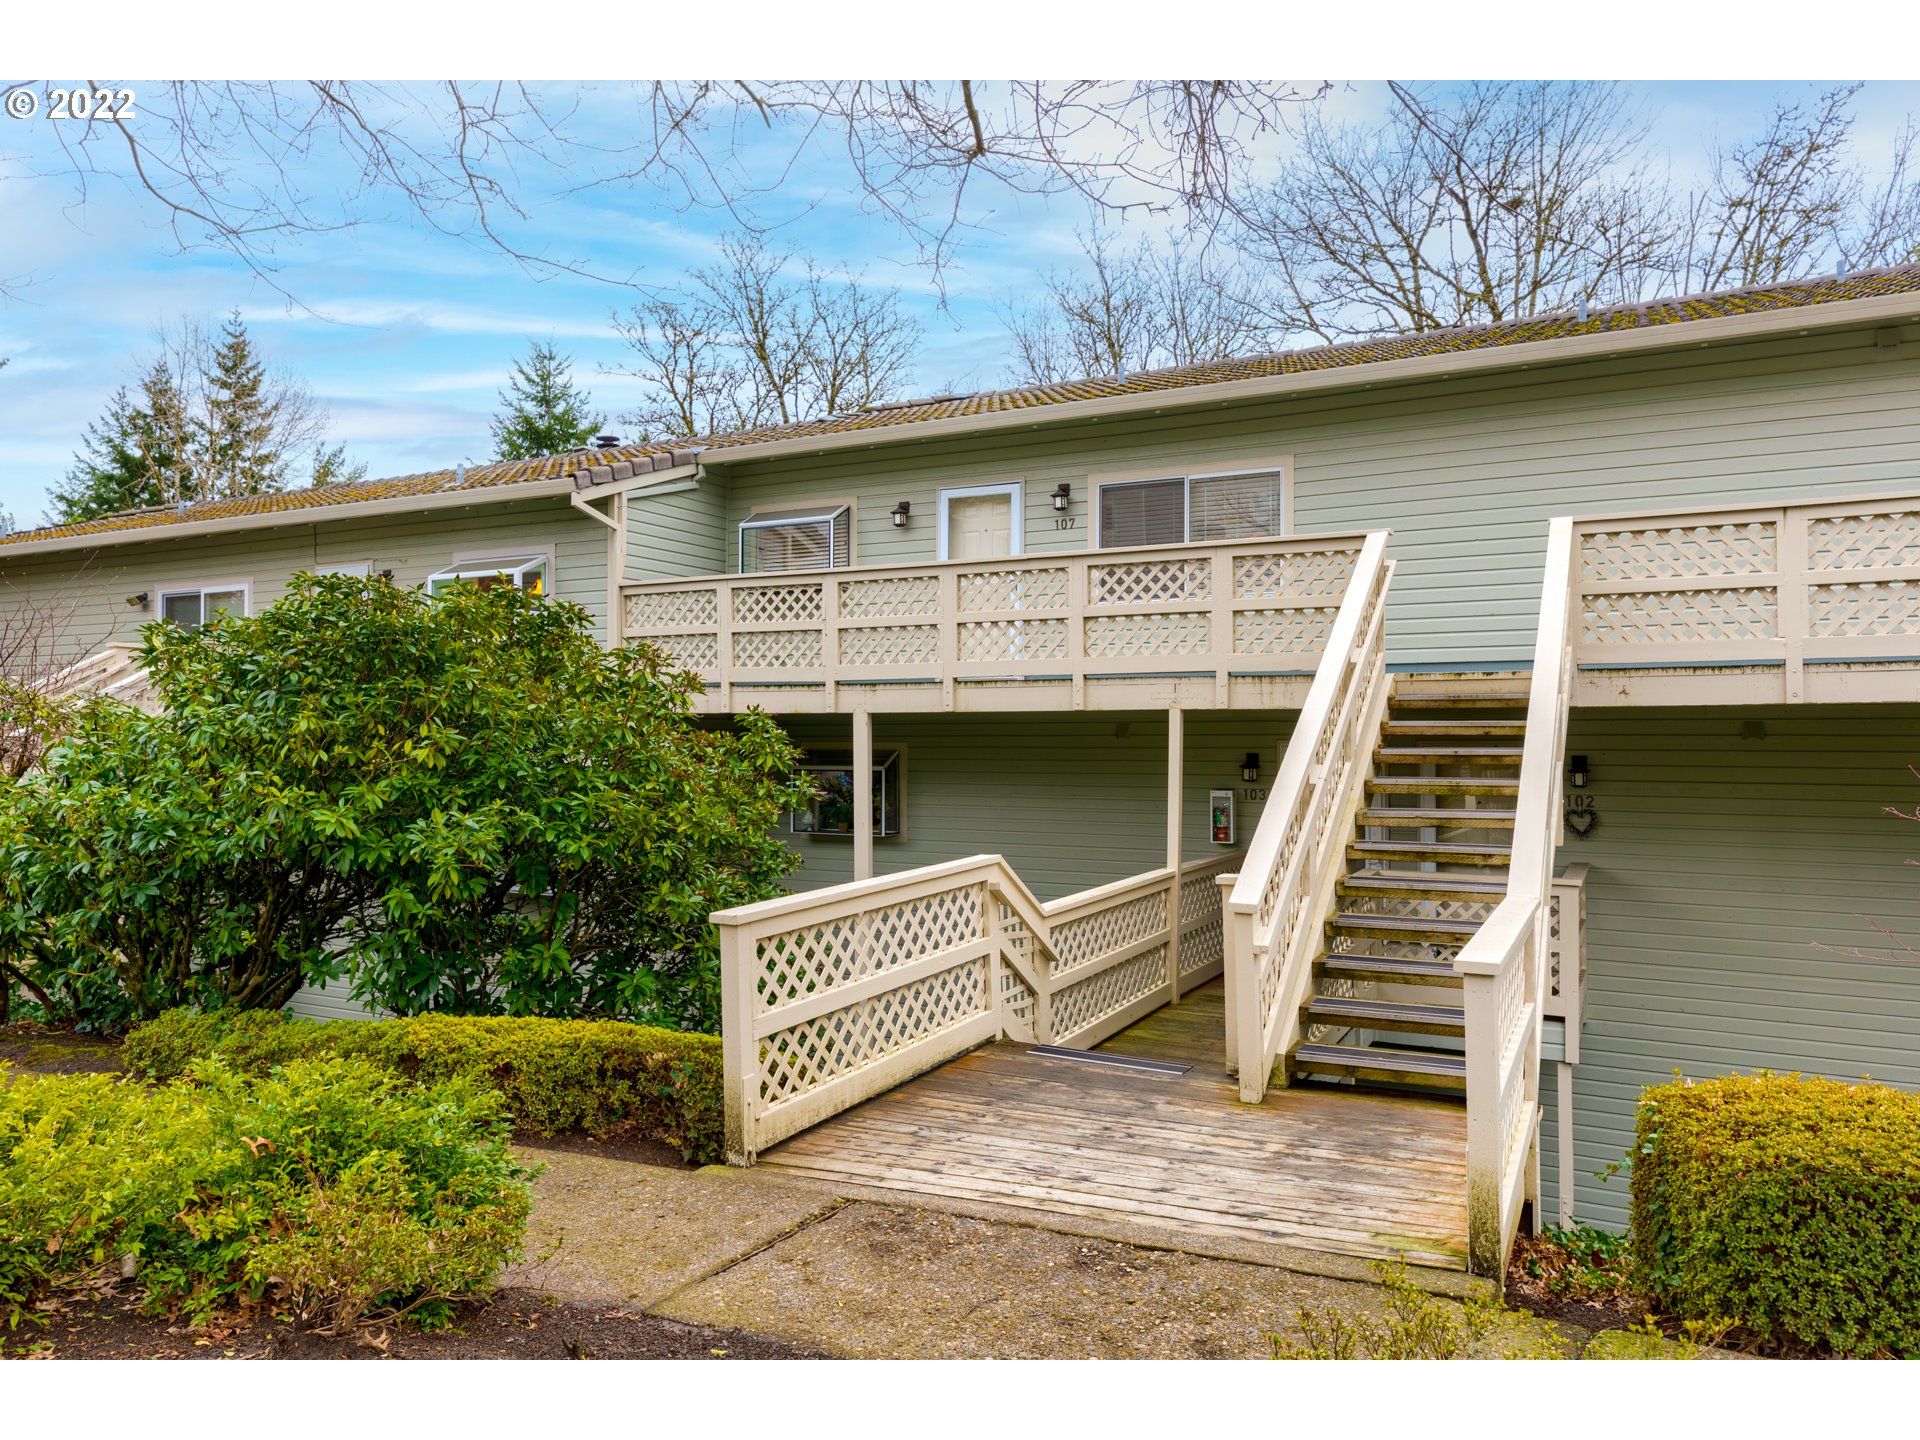 More Details about MLS # 22011580 : 3433 MCNARY PKWY 107